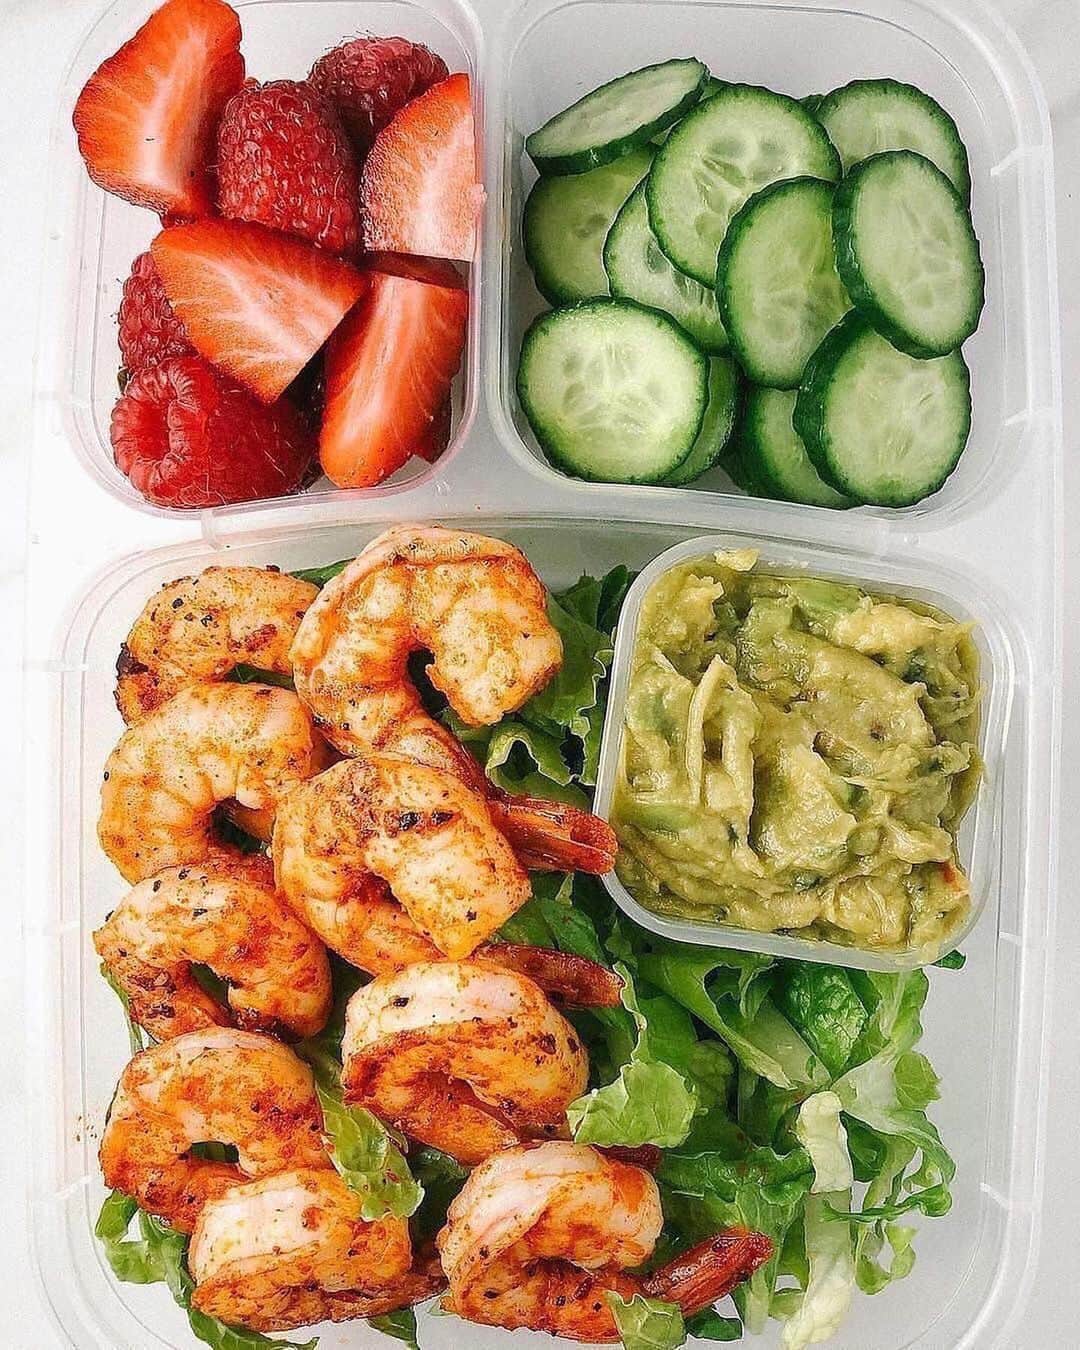 Sharing Healthy Snack Ideasのインスタグラム：「Lunch Box inspo 💫🍱💫 Simple & Delicious ideas for the new week💪! 1-5, which is your favourite?!😋 by @mad_about_food ⠀ You guys loveeed the last Lunch Box post, so here’s some more totally delicious ideas🤩 Preparing your lunch can really help you stay on track and is the best feeling :)🥗 Here’s some inspo for this new week☺️❤️ ⠀ 1. A wholefood lunch idea 👉 strawberries and raspberries, cucumber slices with guac, salad with romaine lettuce and seasoned shrimp 🍤 ⠀ 2. Salmon lunch 👉 berries, 2 eggs and a kale salad with crispy salmon, cucumbers and tomatoes. ⠀ 3. Pistachios😍 and fresh raspberries and snacks. With lunch Grilled courgettes with cheddar cheese cubes 🧀 with peppered salami and rocket salad. ⠀ 4. Delicious Low Carb idea: cucumber pinwheels with goat cheese and prosciutto. Not forgetting dark chocolate 🍫 steamed broccoli, and an arugula salad topped with tomatoes! ⠀ 5. Sweet potato gnocchi with pesto, sprouted pumpkin seeds, salmon, spring mix, sliced honeycrisp apples🍏and some dark chocolate.  ⠀」